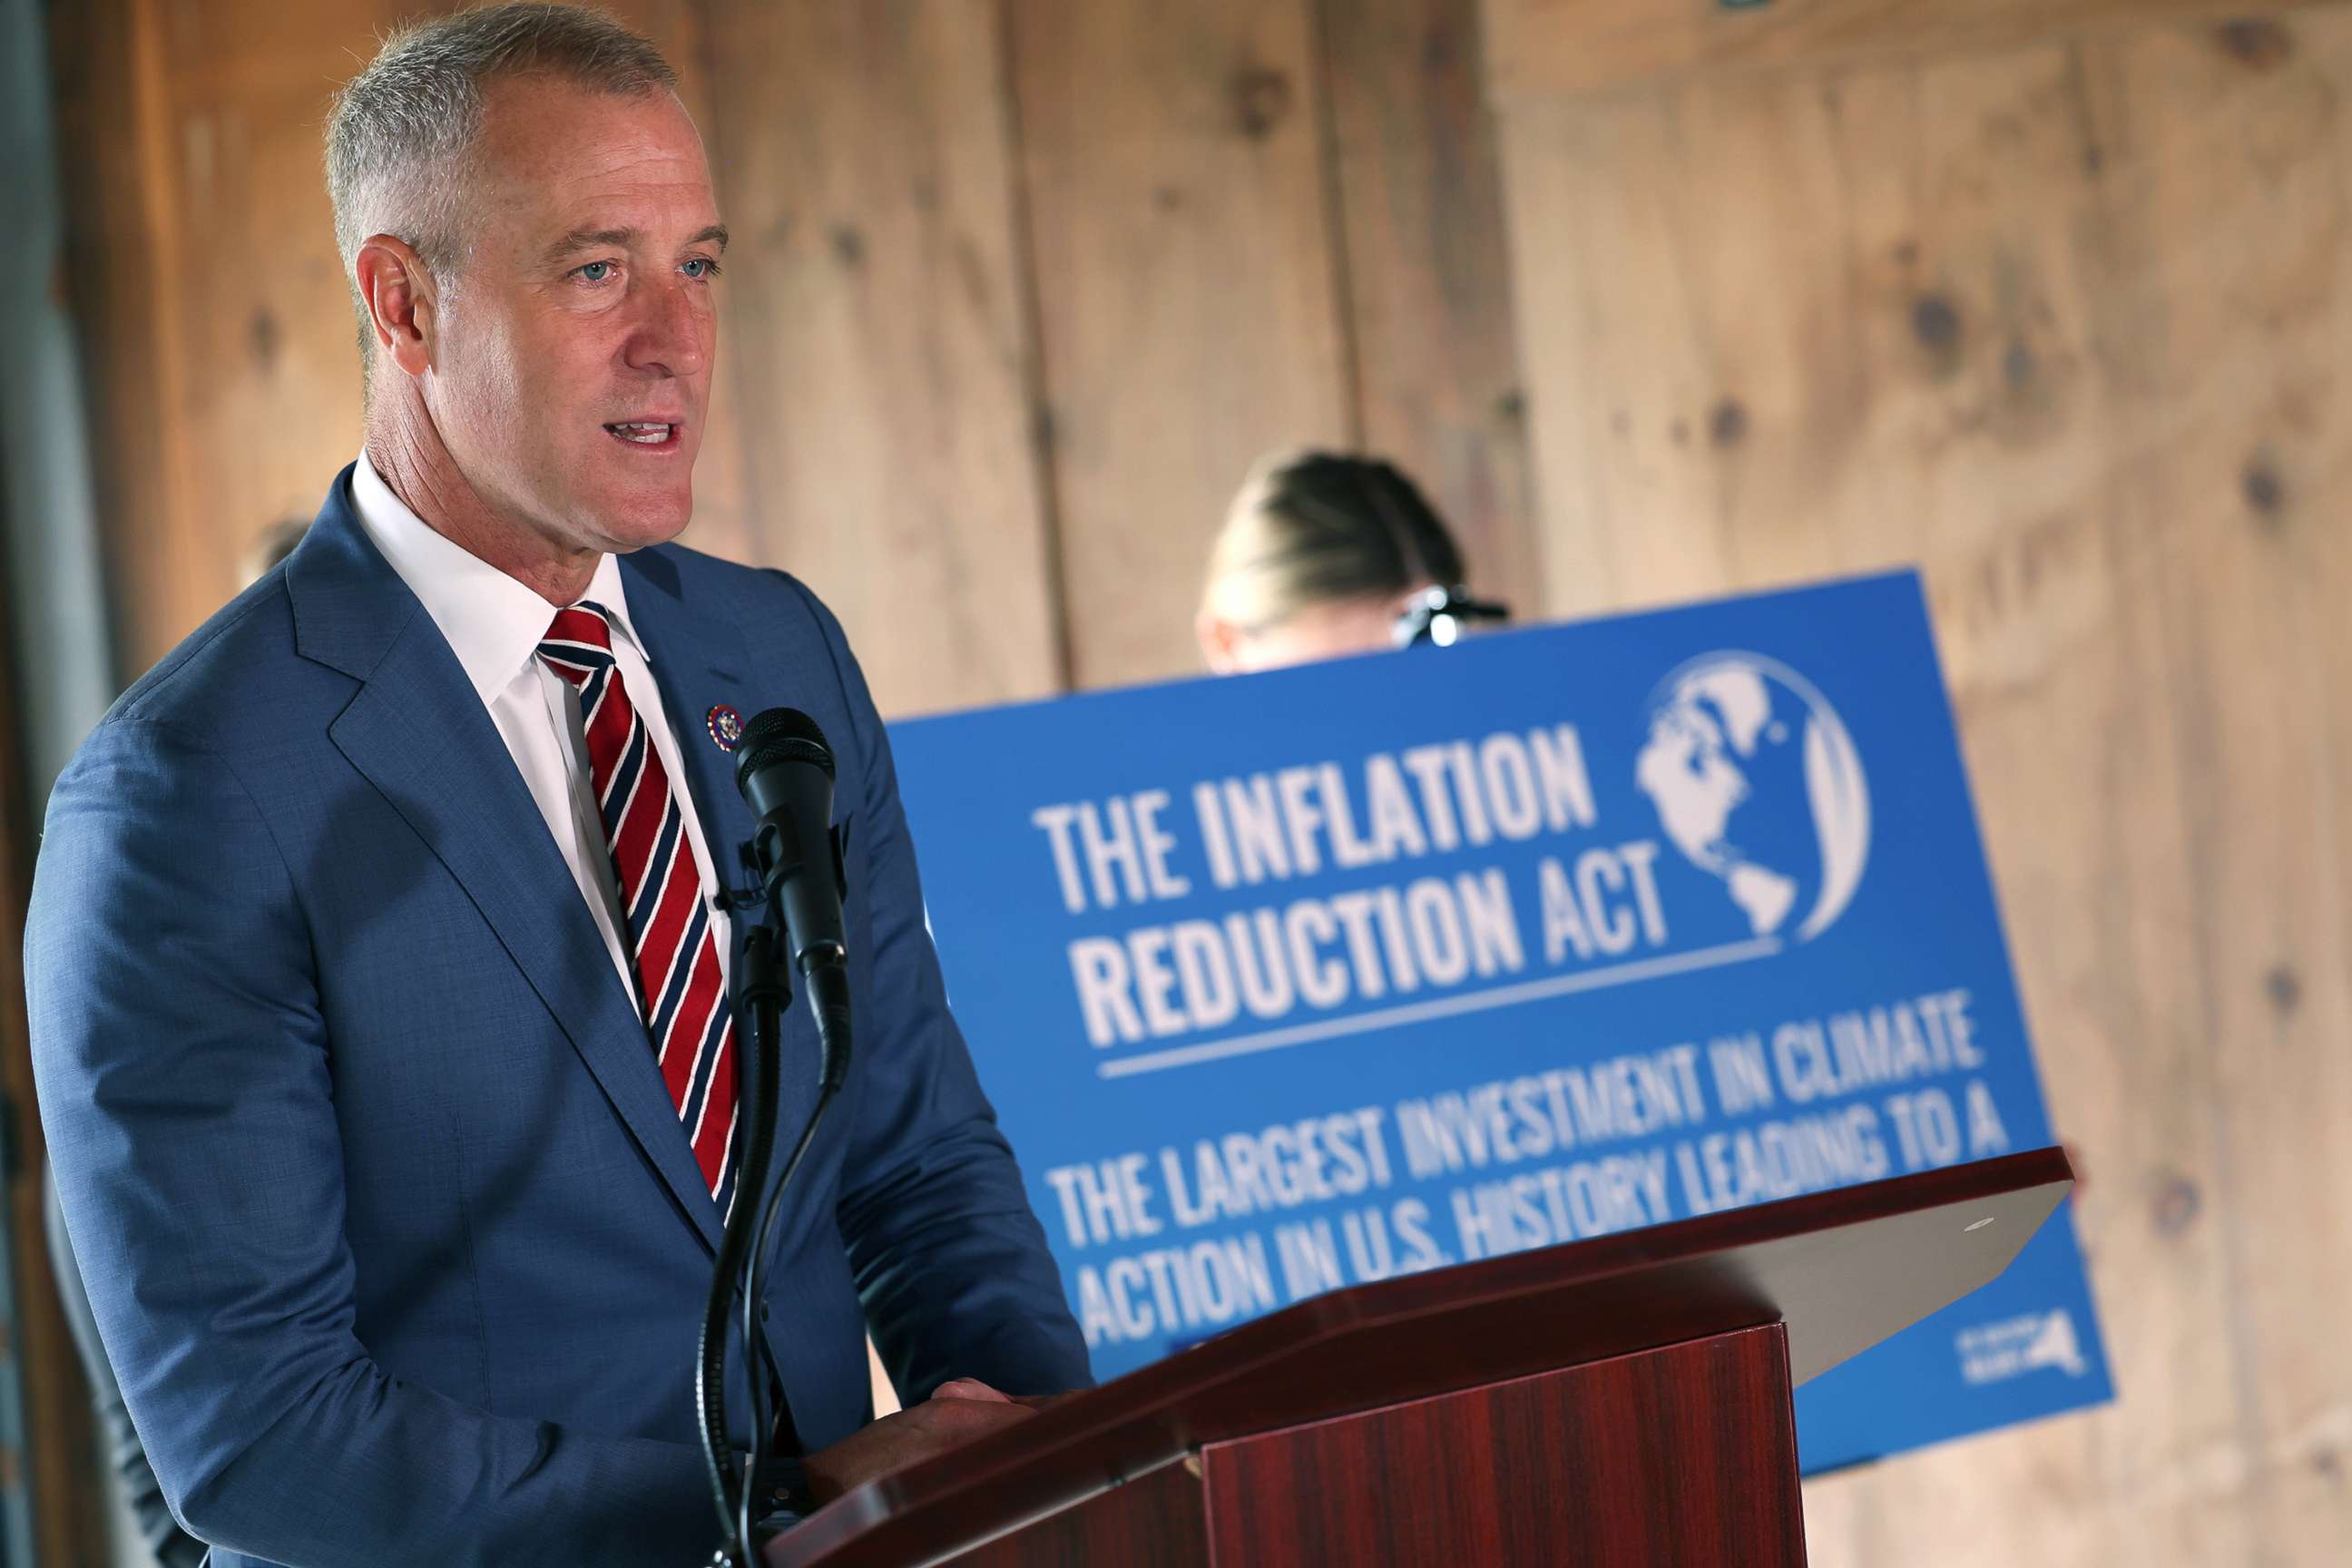 PHOTO: Rep. Sean Patrick Maloney speaks during a press conference on the the Inflation Reduction Act at Glynwood Boat House, Aug. 17, 2022, in Cold Spring, New York. 